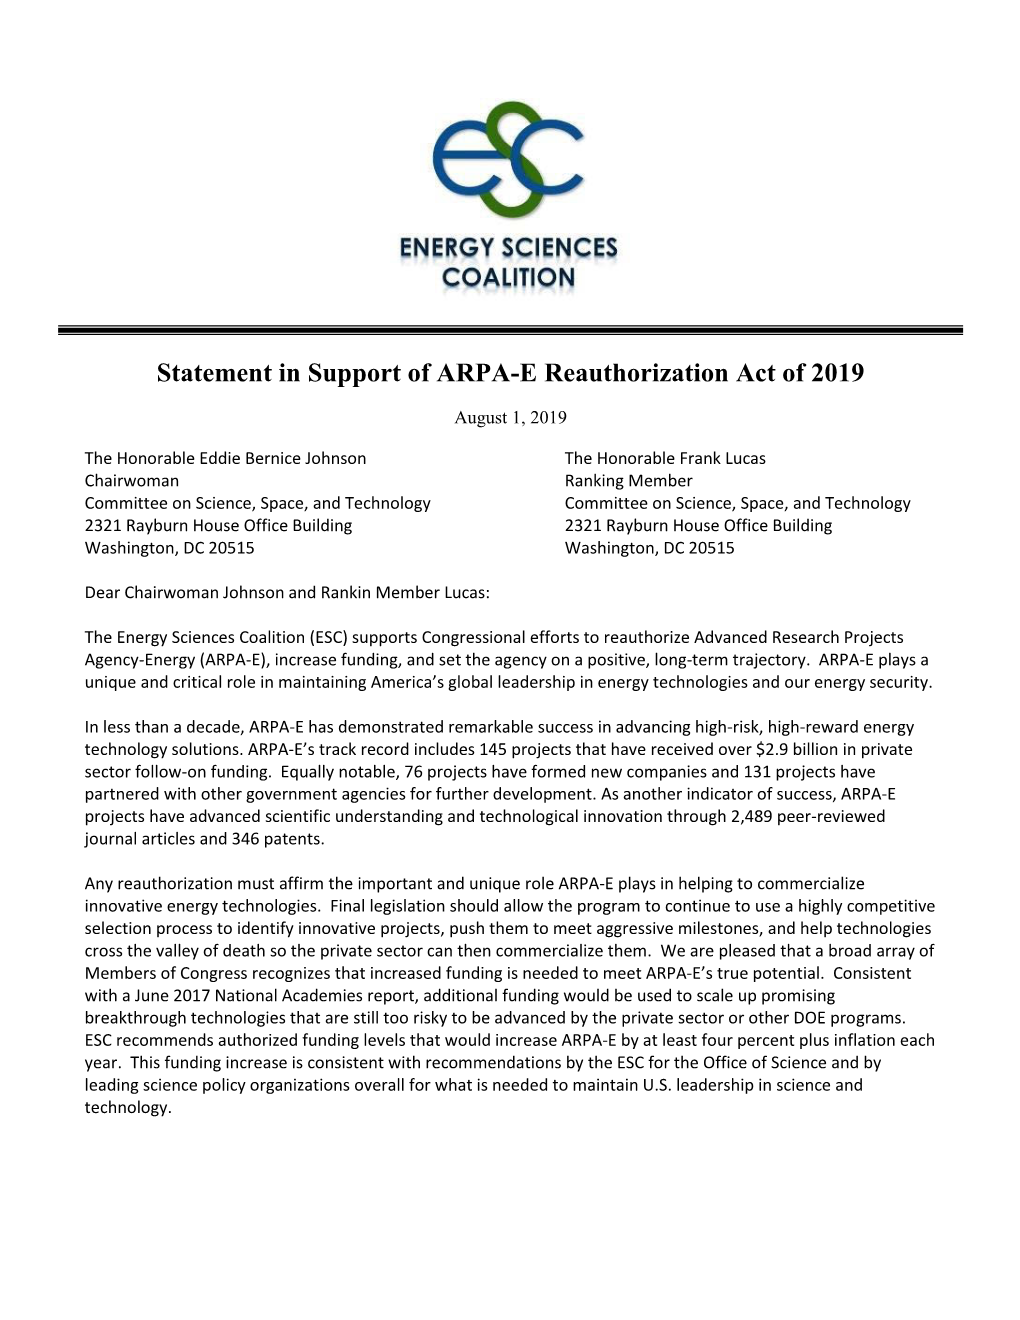 Statement in Support of ARPA-E Reauthorization Act of 2019